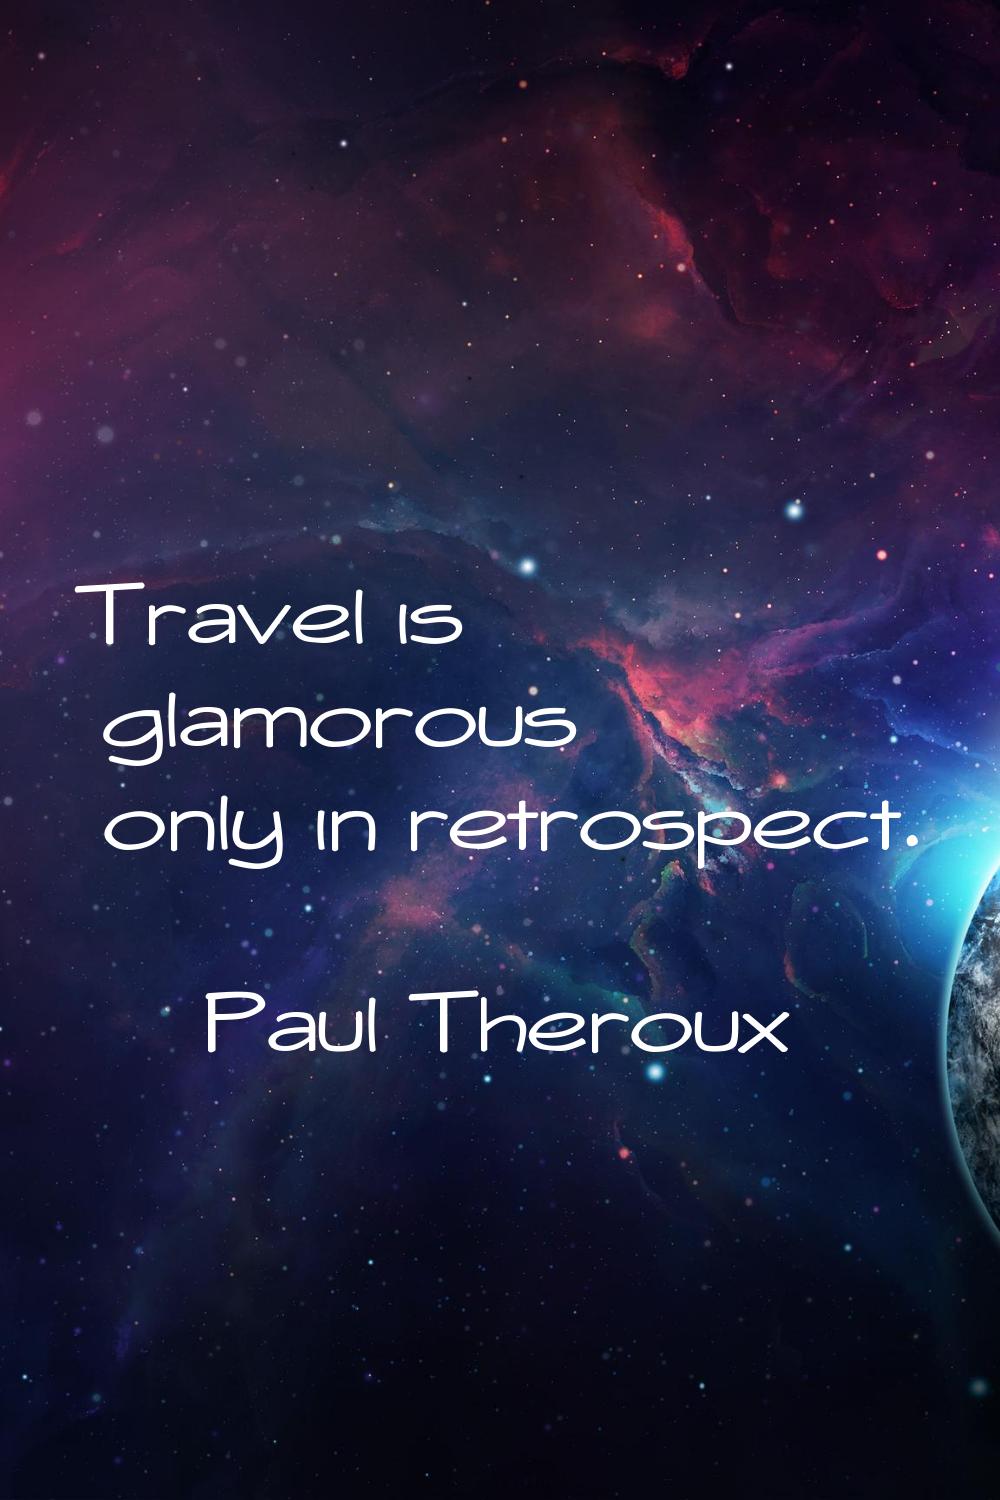 Travel is glamorous only in retrospect.